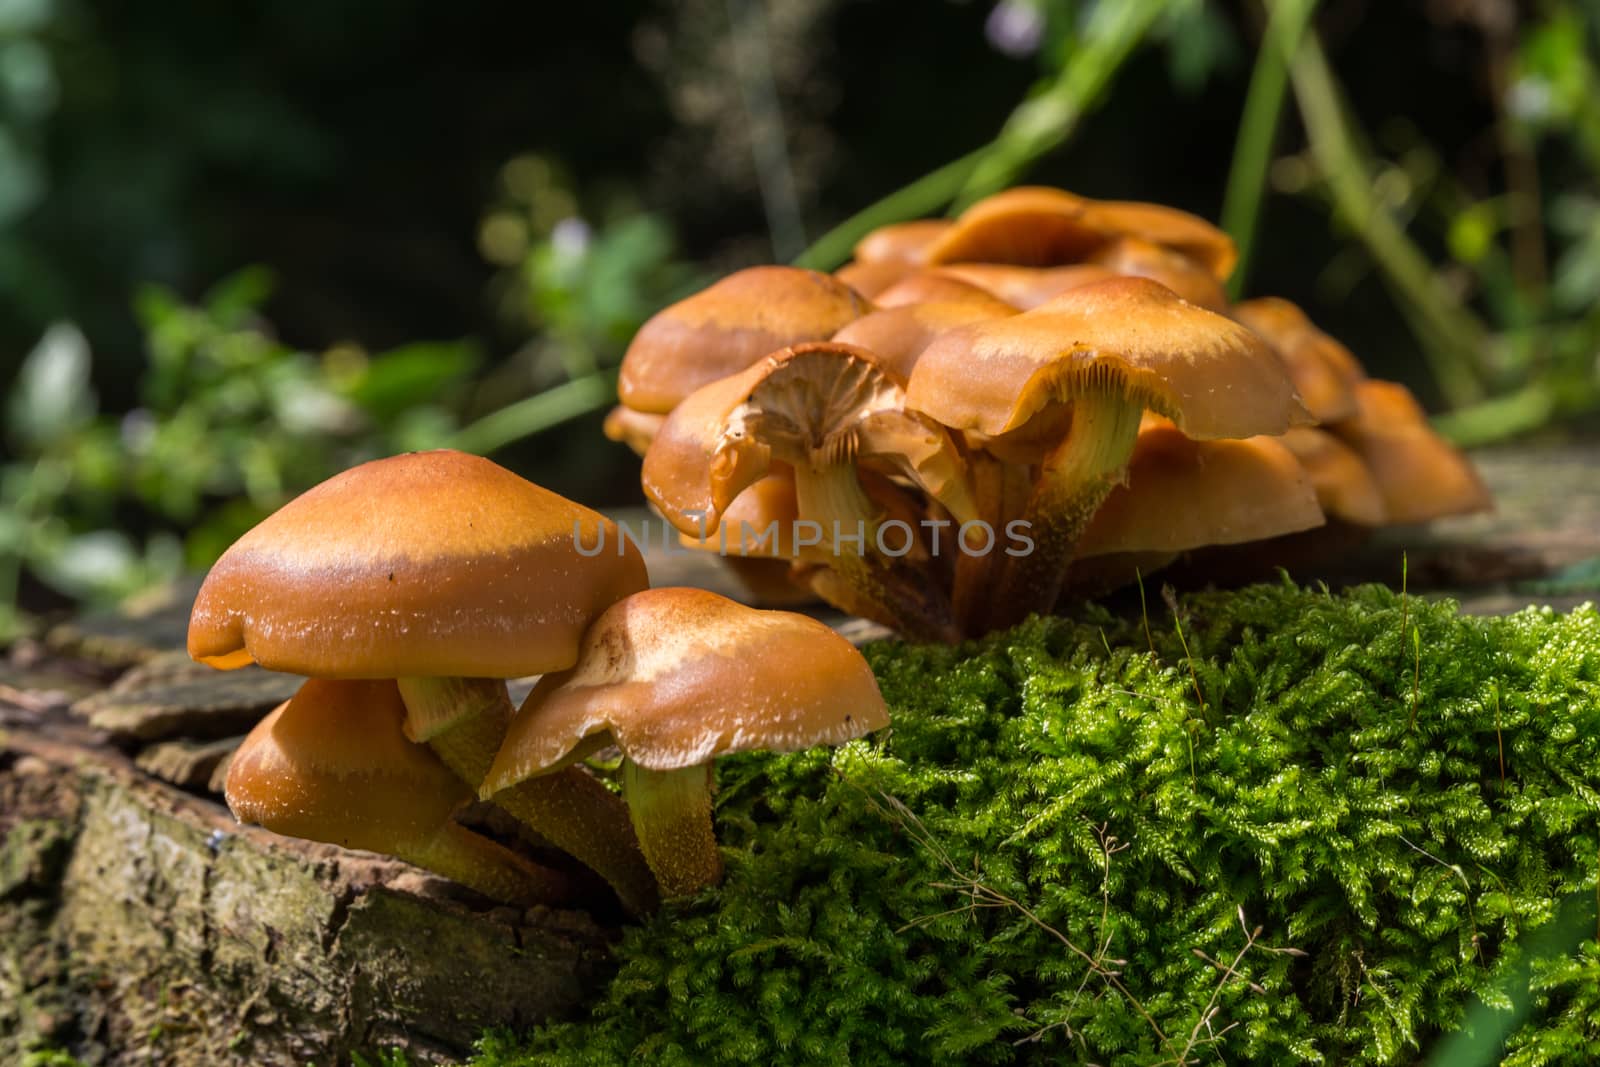 Closeup of a group of brown forest mushrooms